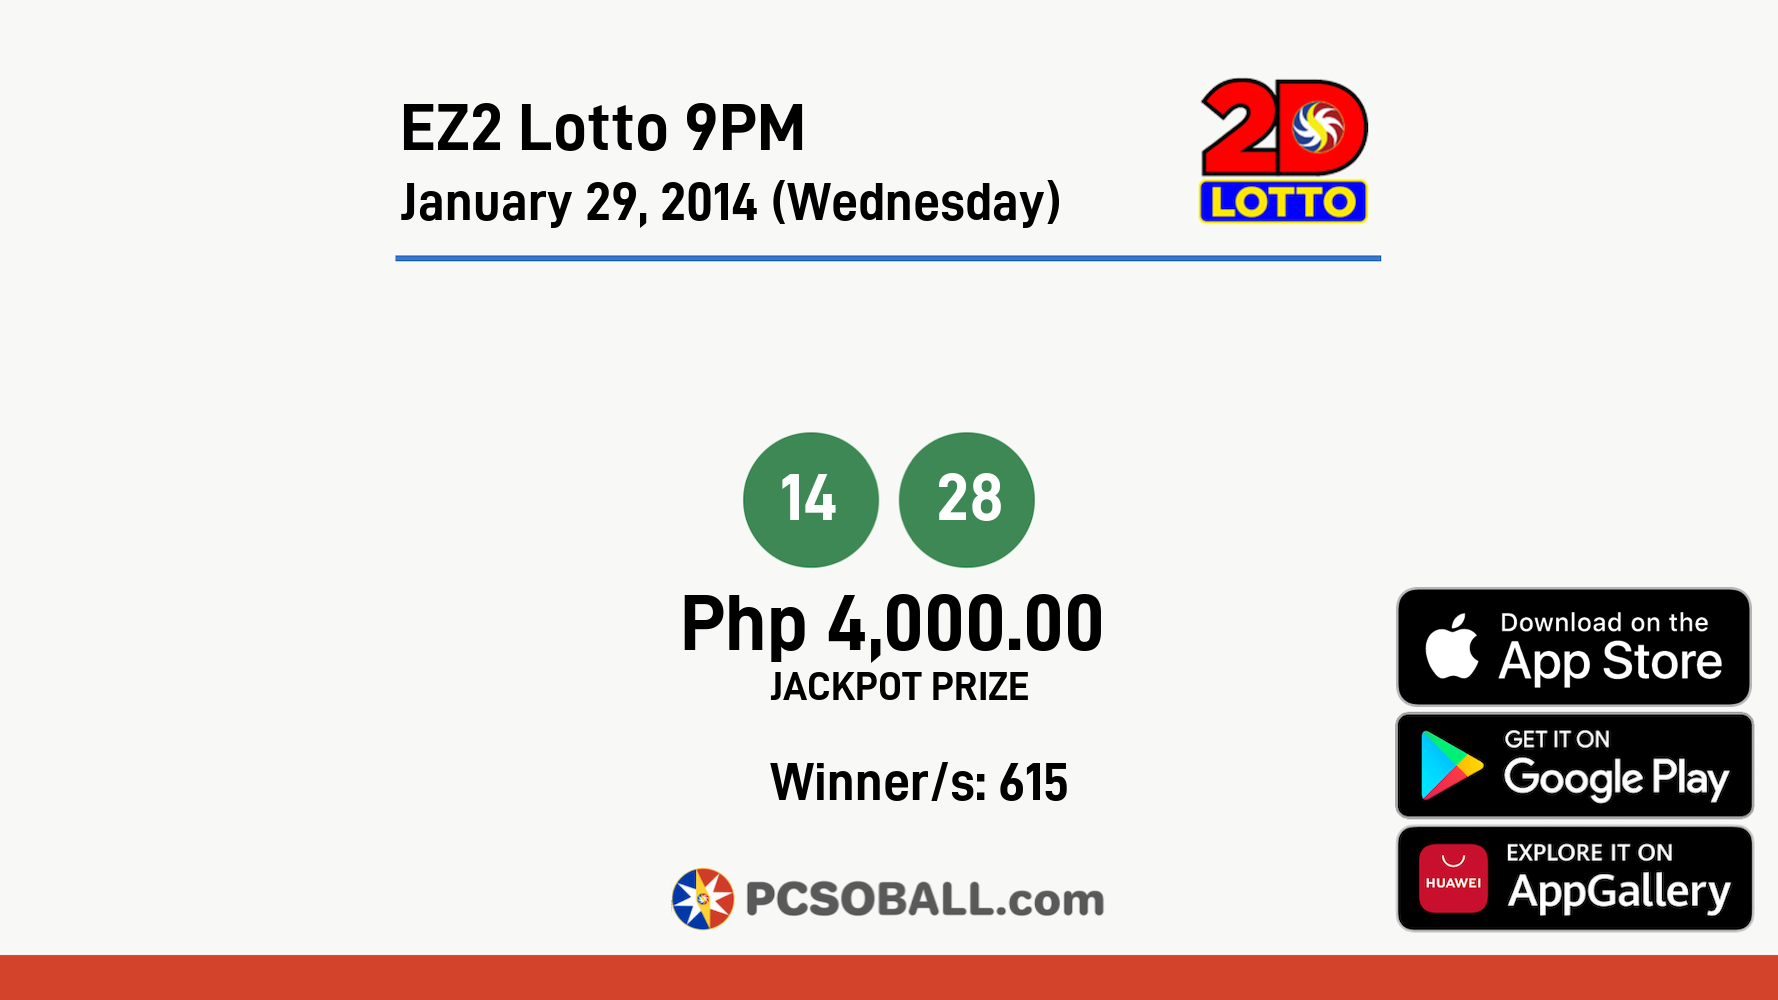 EZ2 Lotto 9PM January 29, 2014 (Wednesday) Result